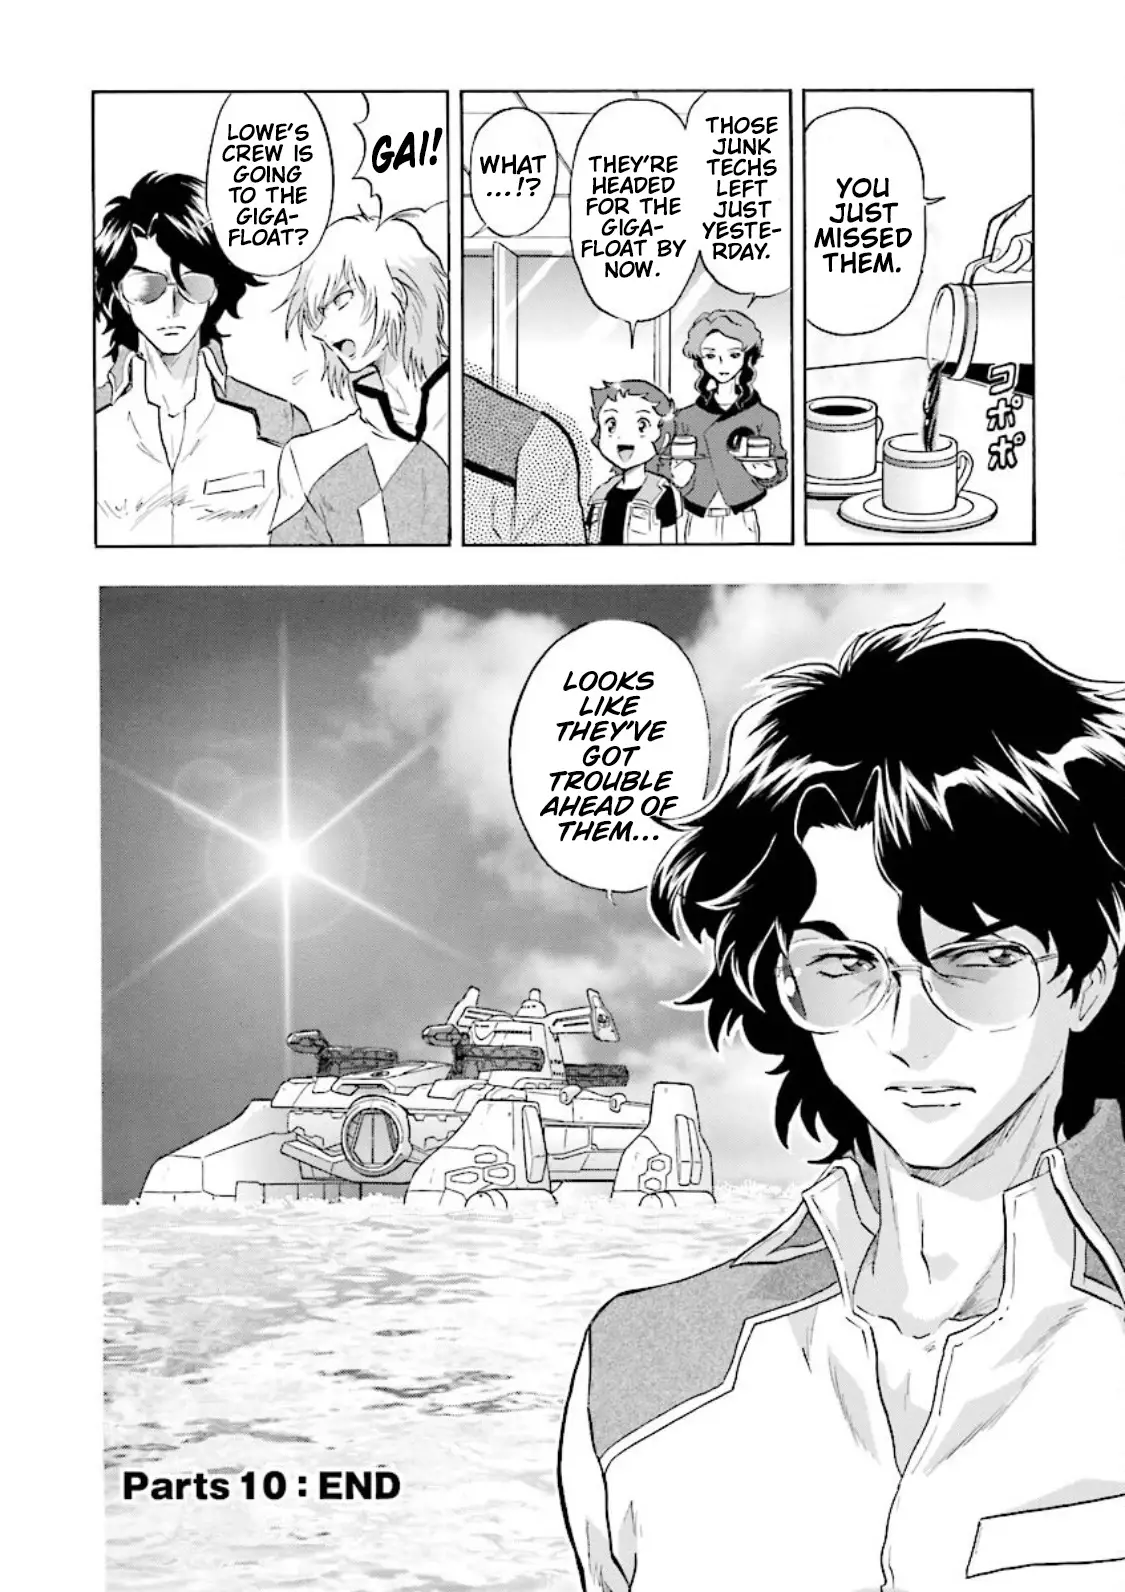 Mobile Suit Gundam Seed Astray Re:master Edition - 10 page 36-440c663f